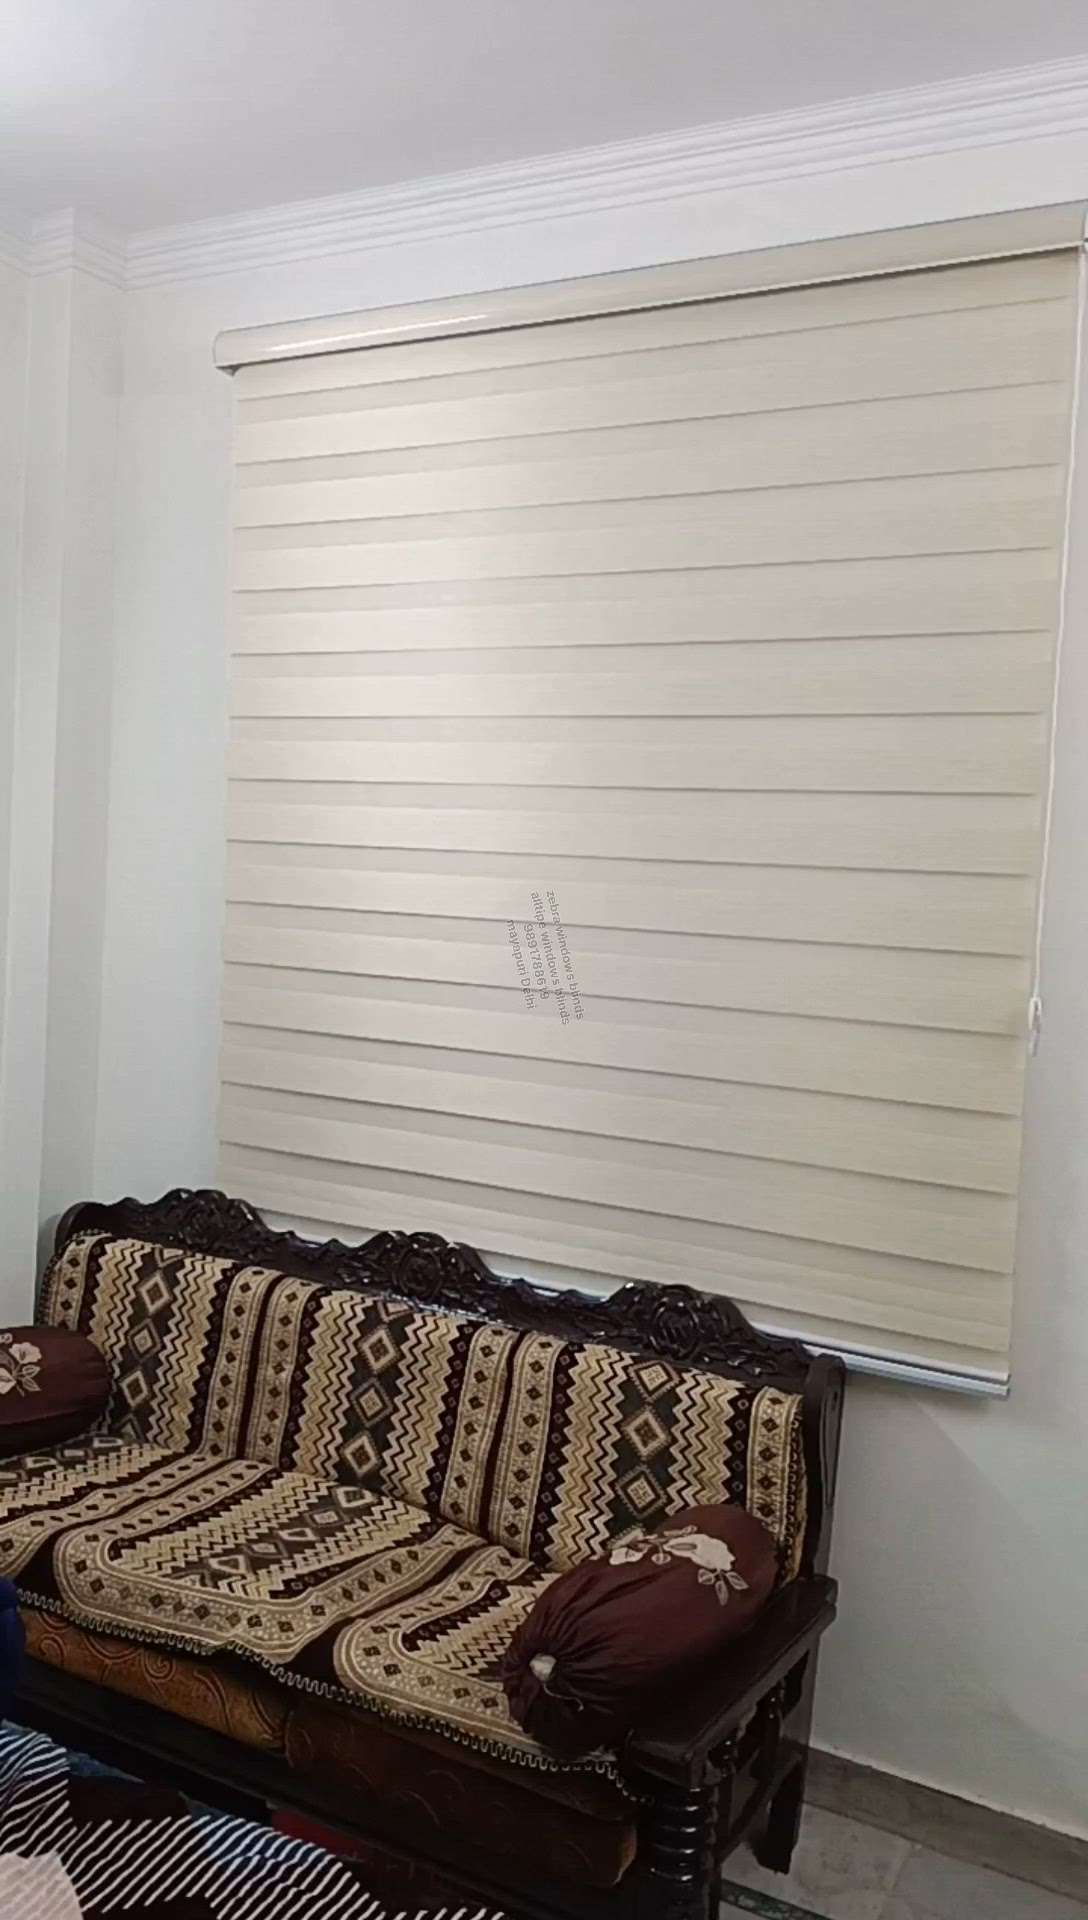 How to Become a How to remove blinds from windows  Expert ll roller zebra blinds installation mayapuri Delhi contact 9891788619